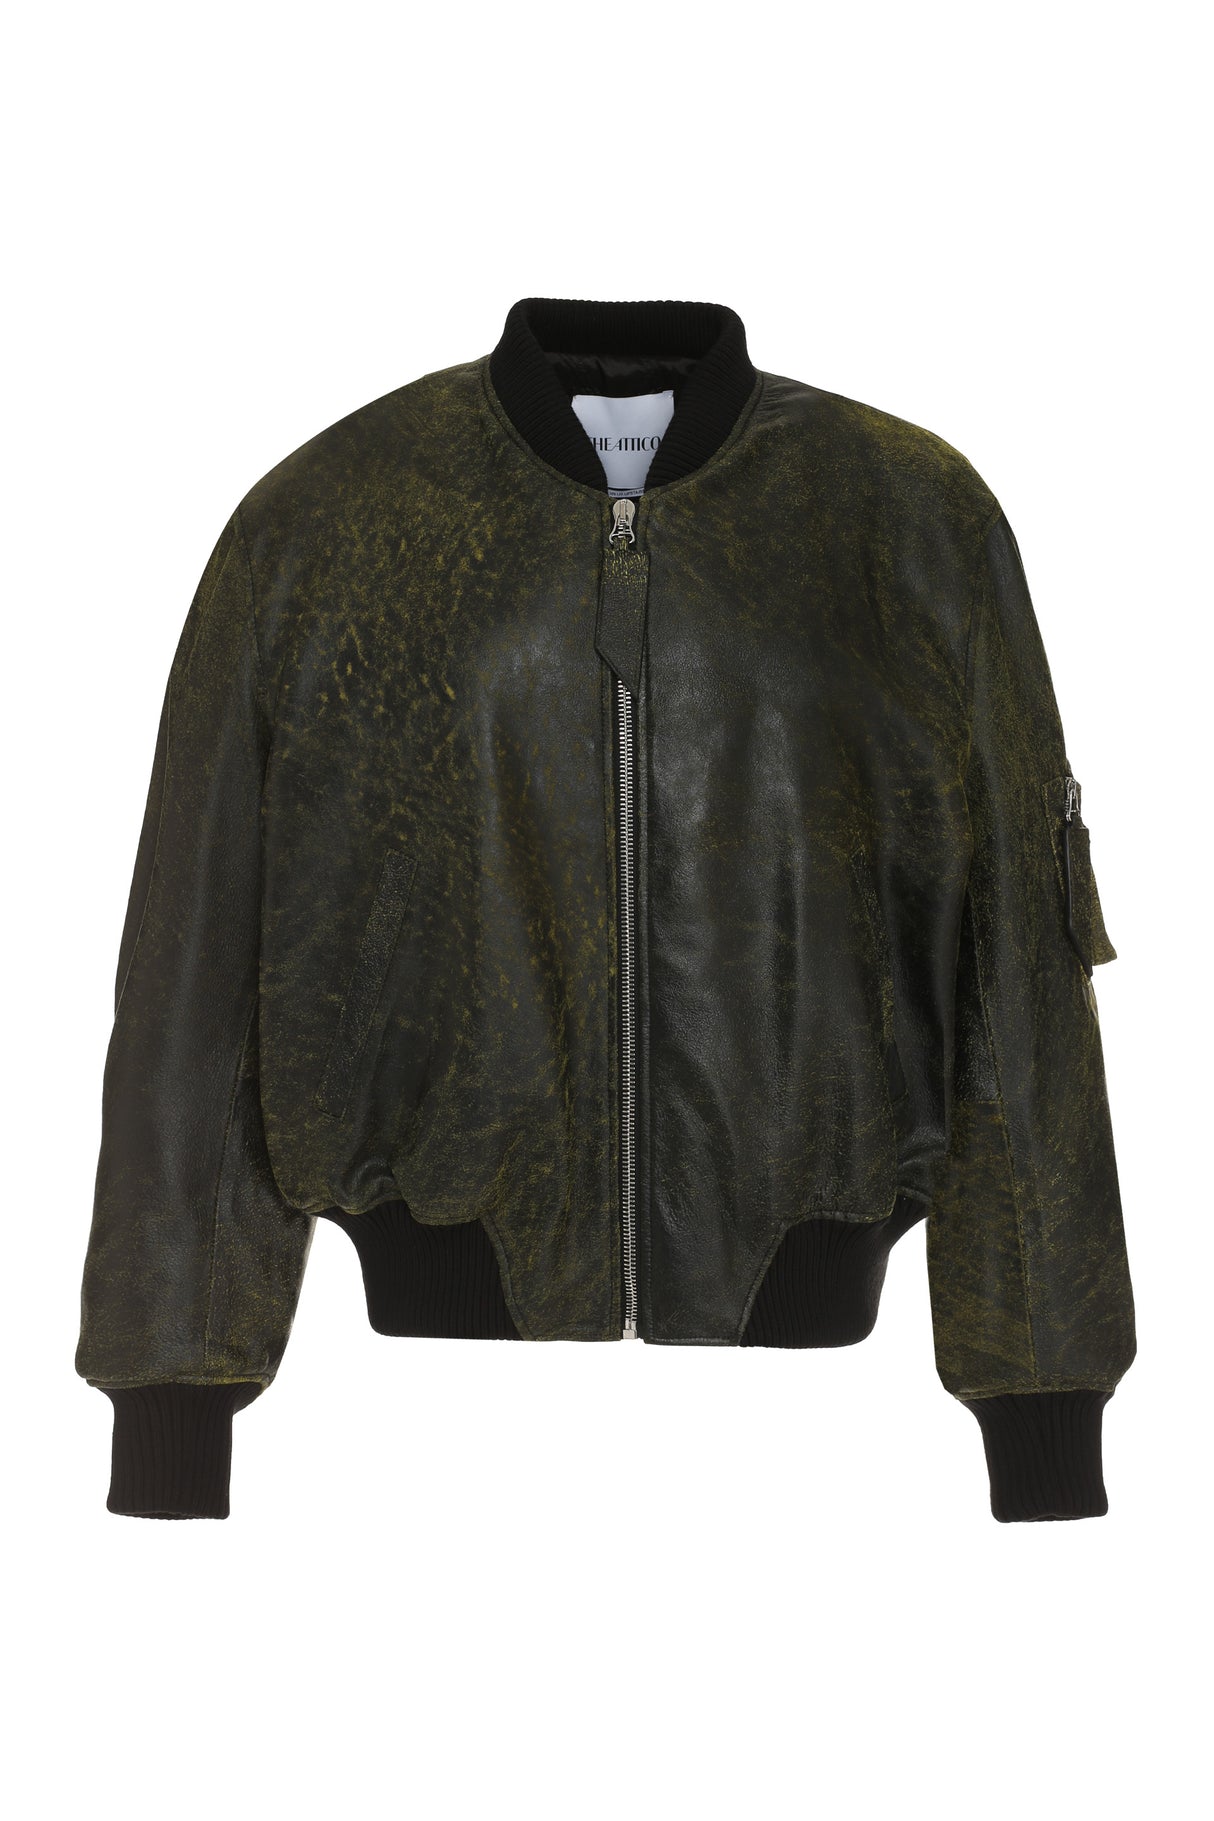 THE ATTICO Cracked Effect Leather Bomber Jacket for Women